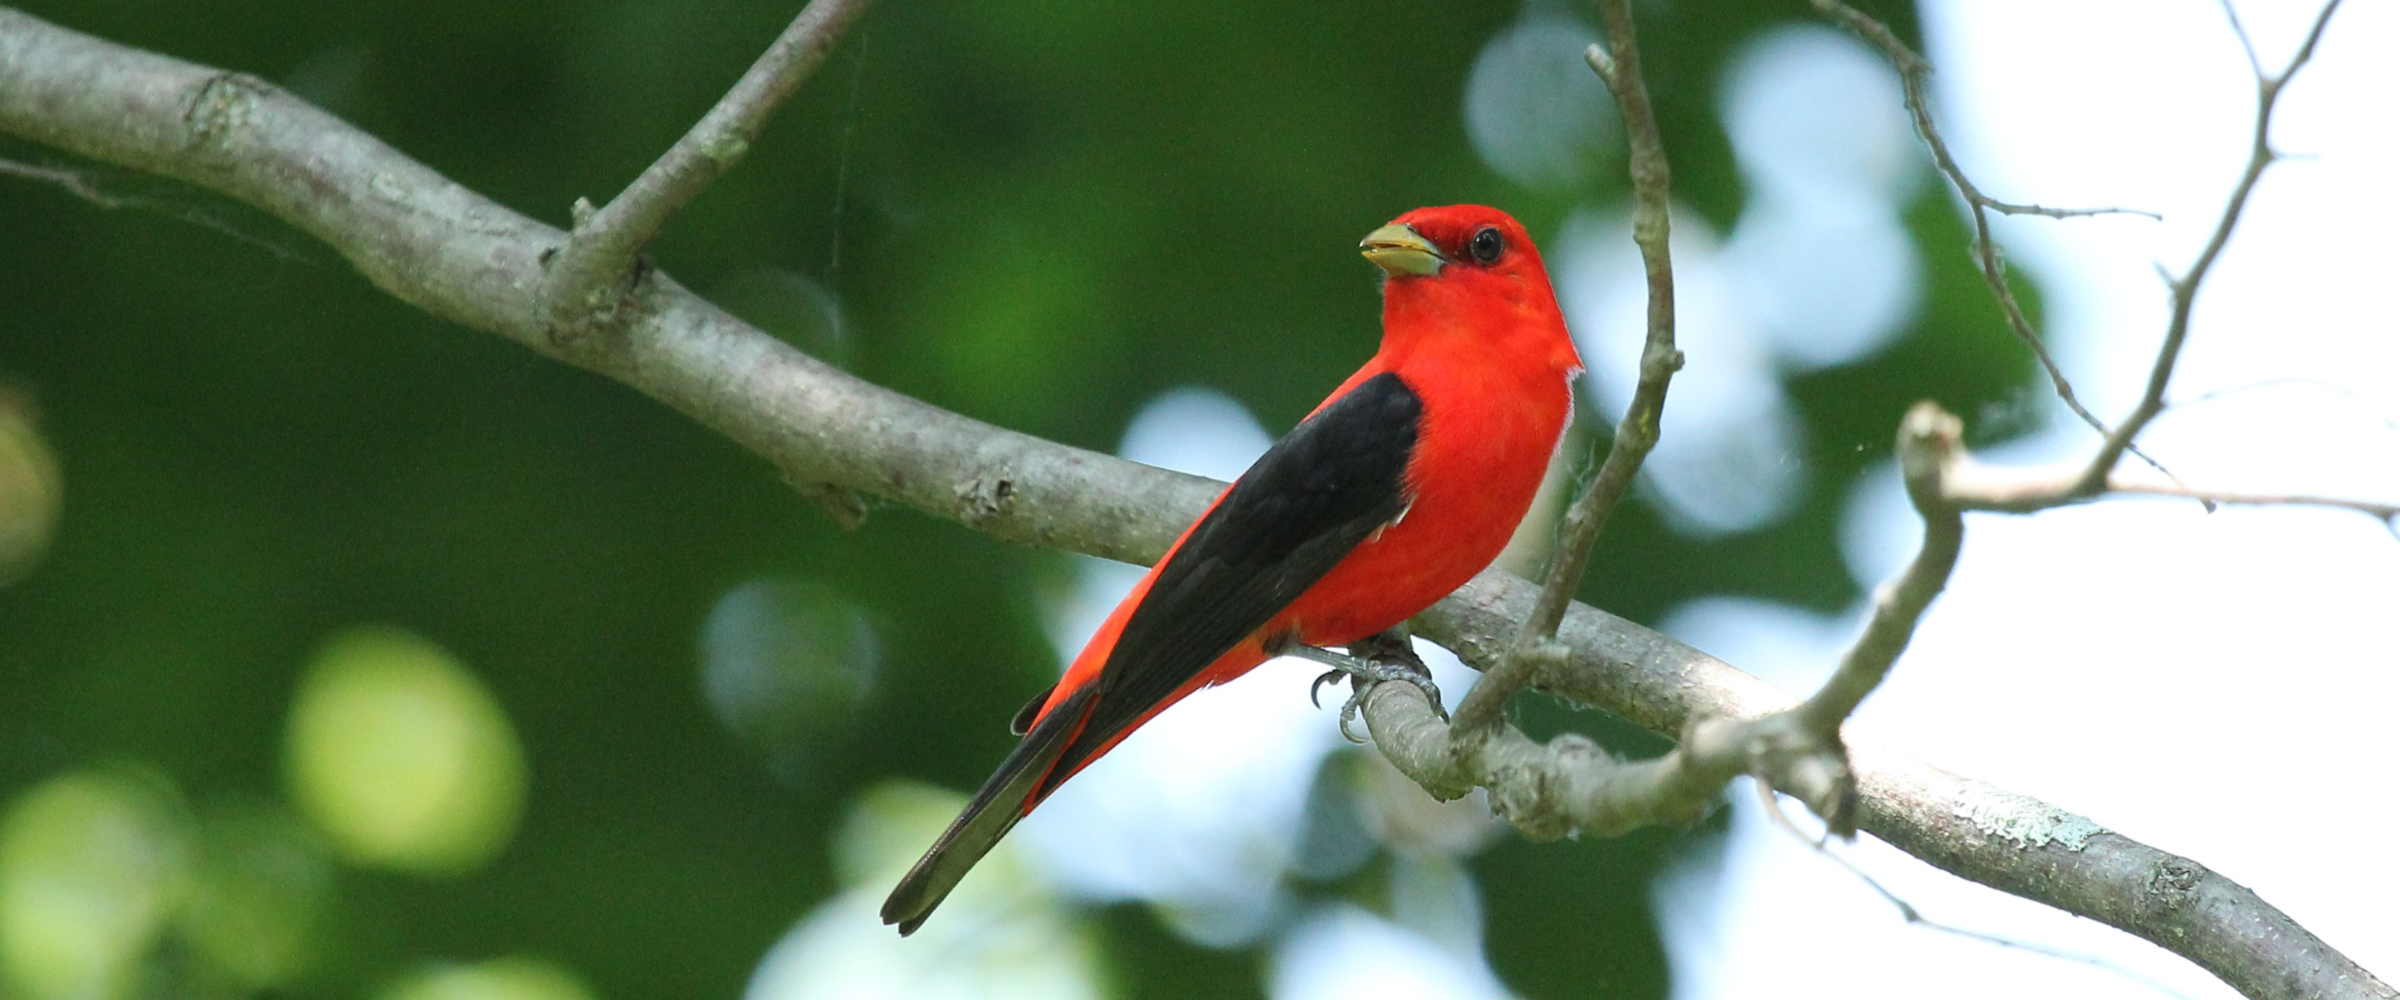 Scarlet Tanager red bird with black beak and black wings, depends on a healthy forest and sugarbush. 